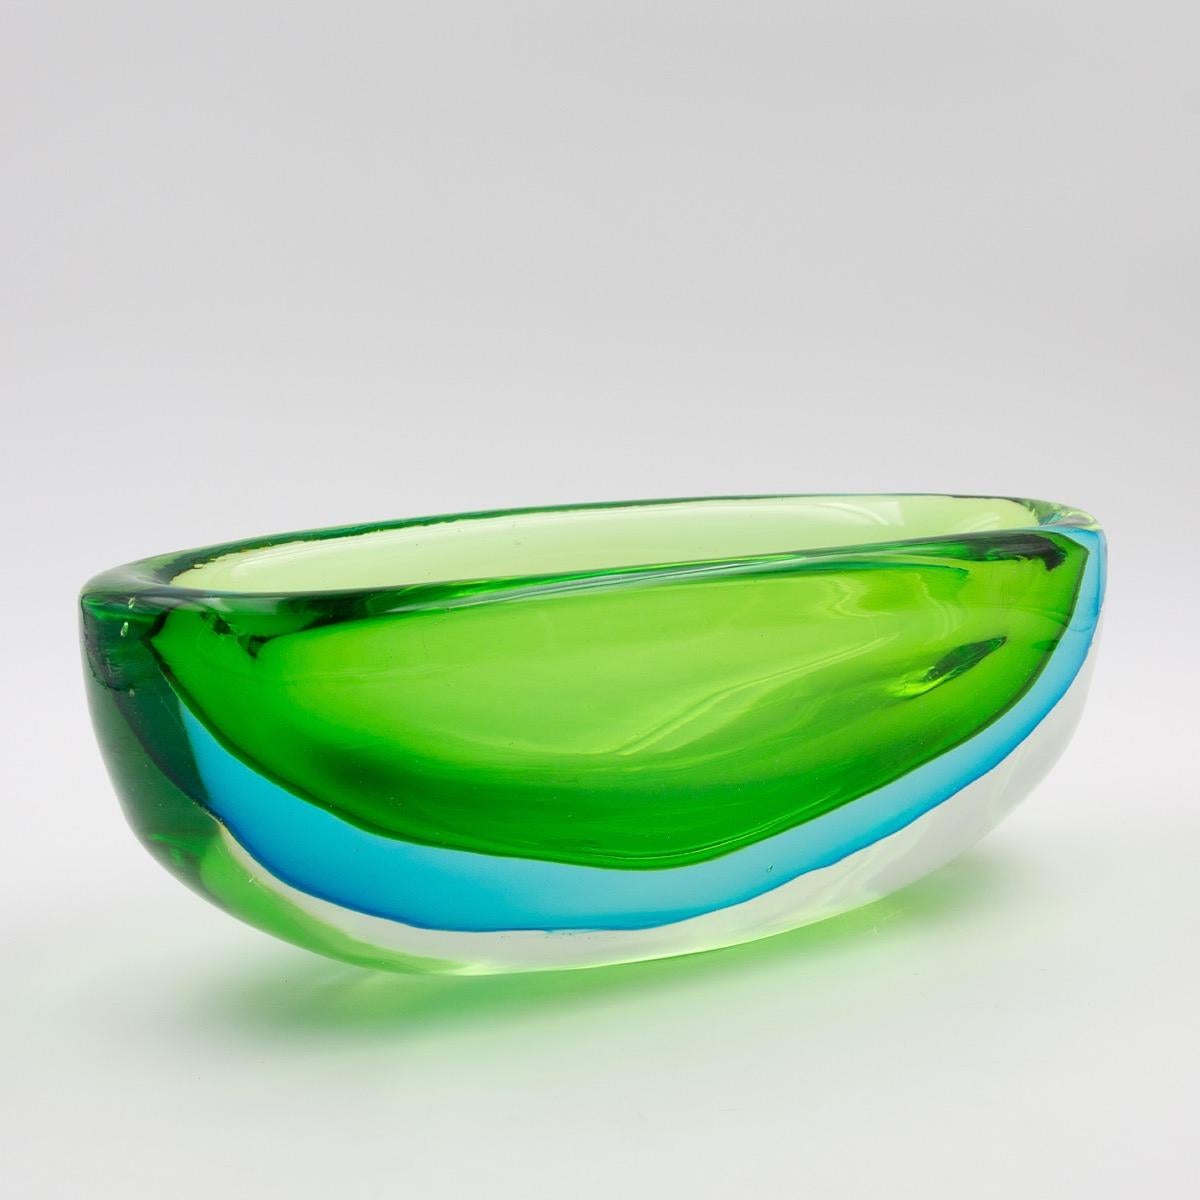 Very fine and large Seguso bowl in glass submerged in blue and green tones
Large and heavy piece
Strong and beautiful presence.

We are located in Belgium; we present Postwar decorative arts with an emphasis on Line Vautrin, French decorators